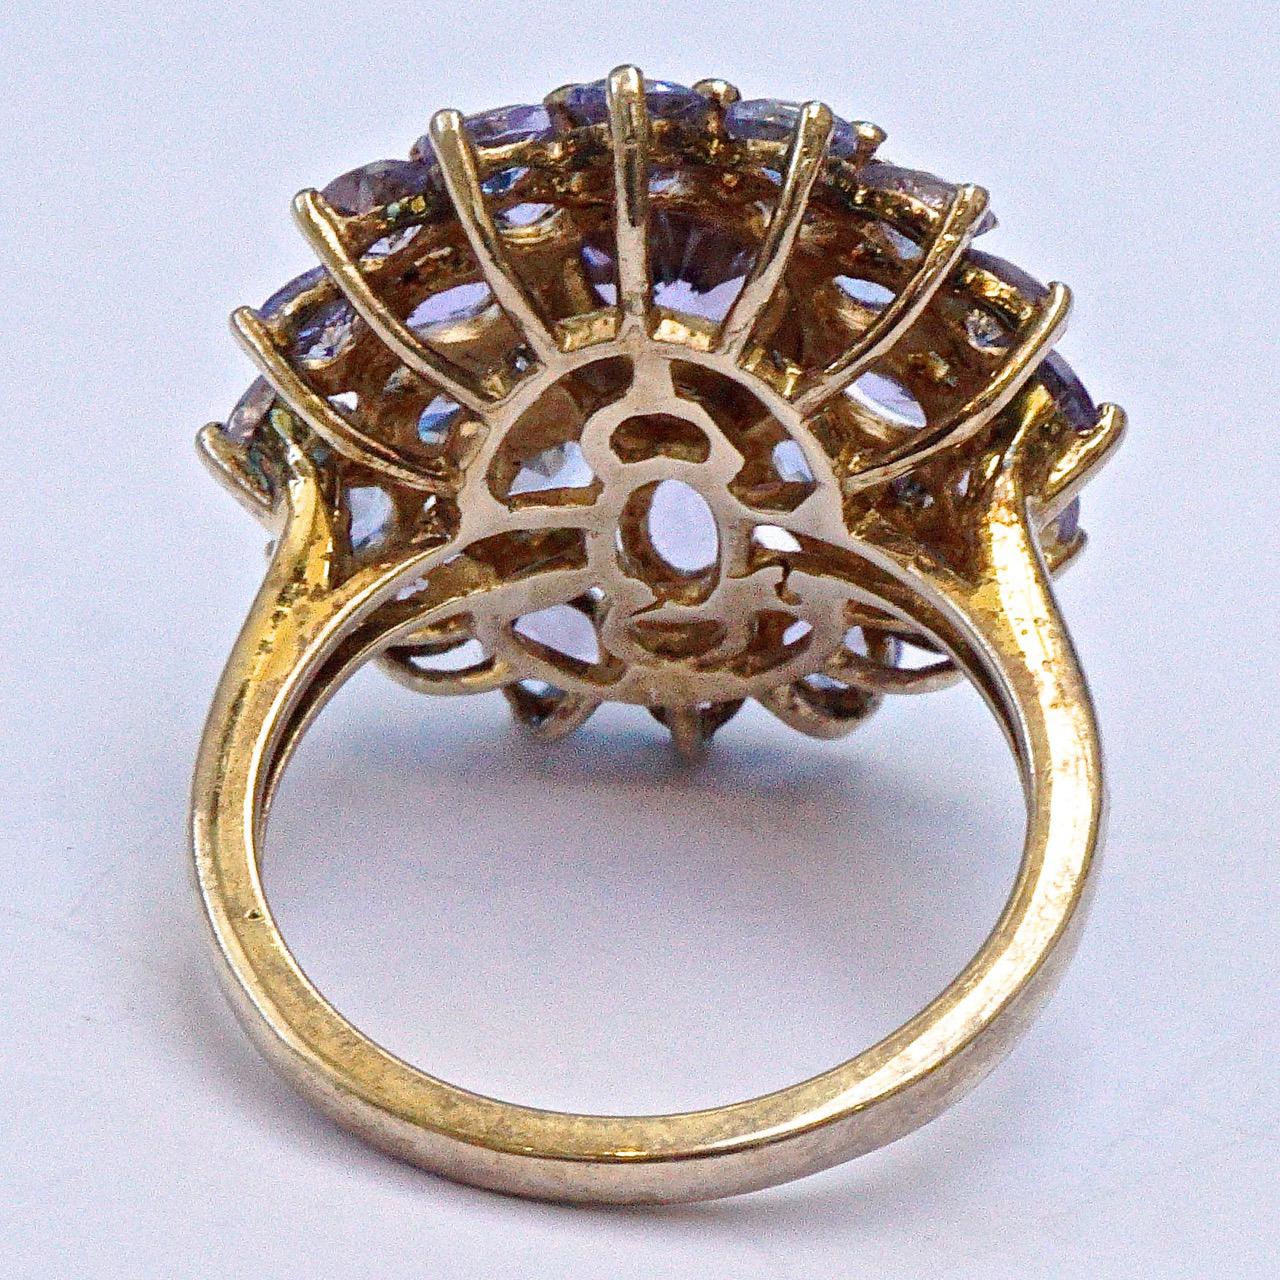 Stylish gold plated and silver ring with faux tanzanites set into a detailed setting. Ring size UK J 1/2, US 5, inside diameter 1.6cm. The front is 2.1cm / .82 inch by 1.9cm / .74 inch. The ring is marked 925.

This is a beautiful vintage dress